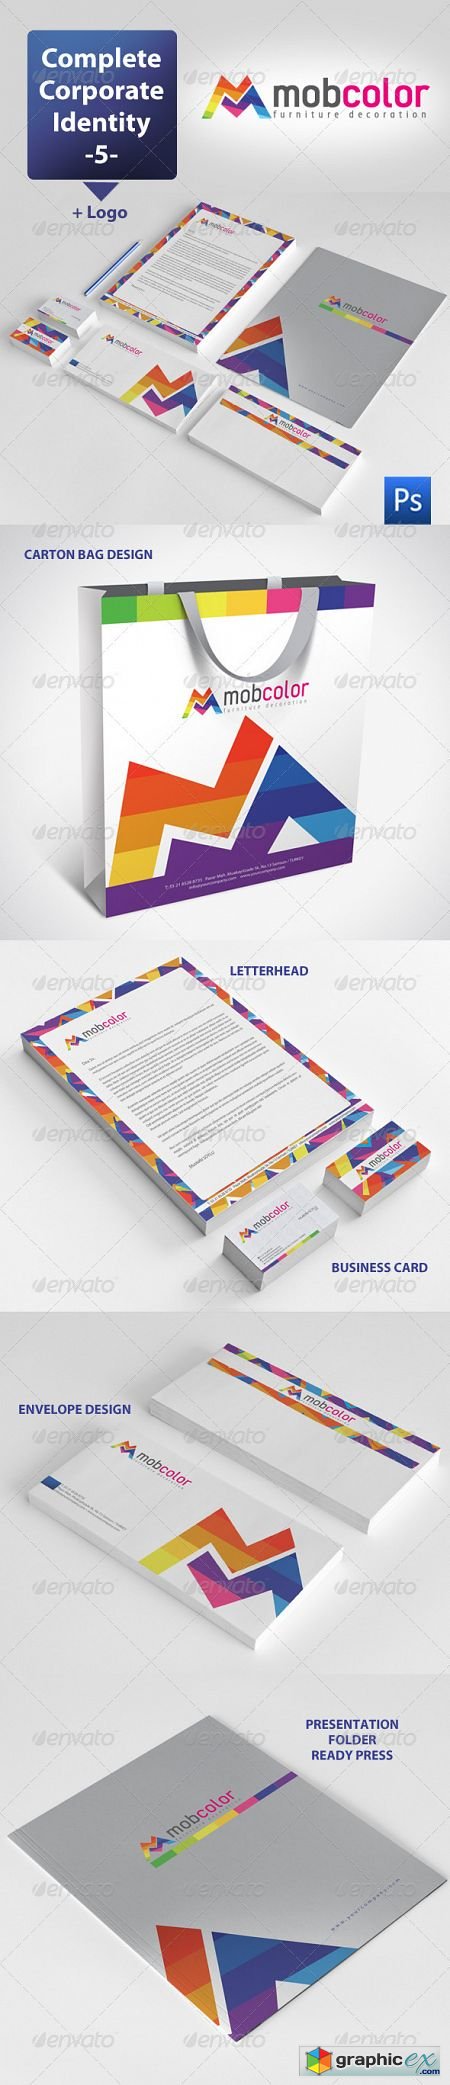 Mobcolor Corporate Identity Package